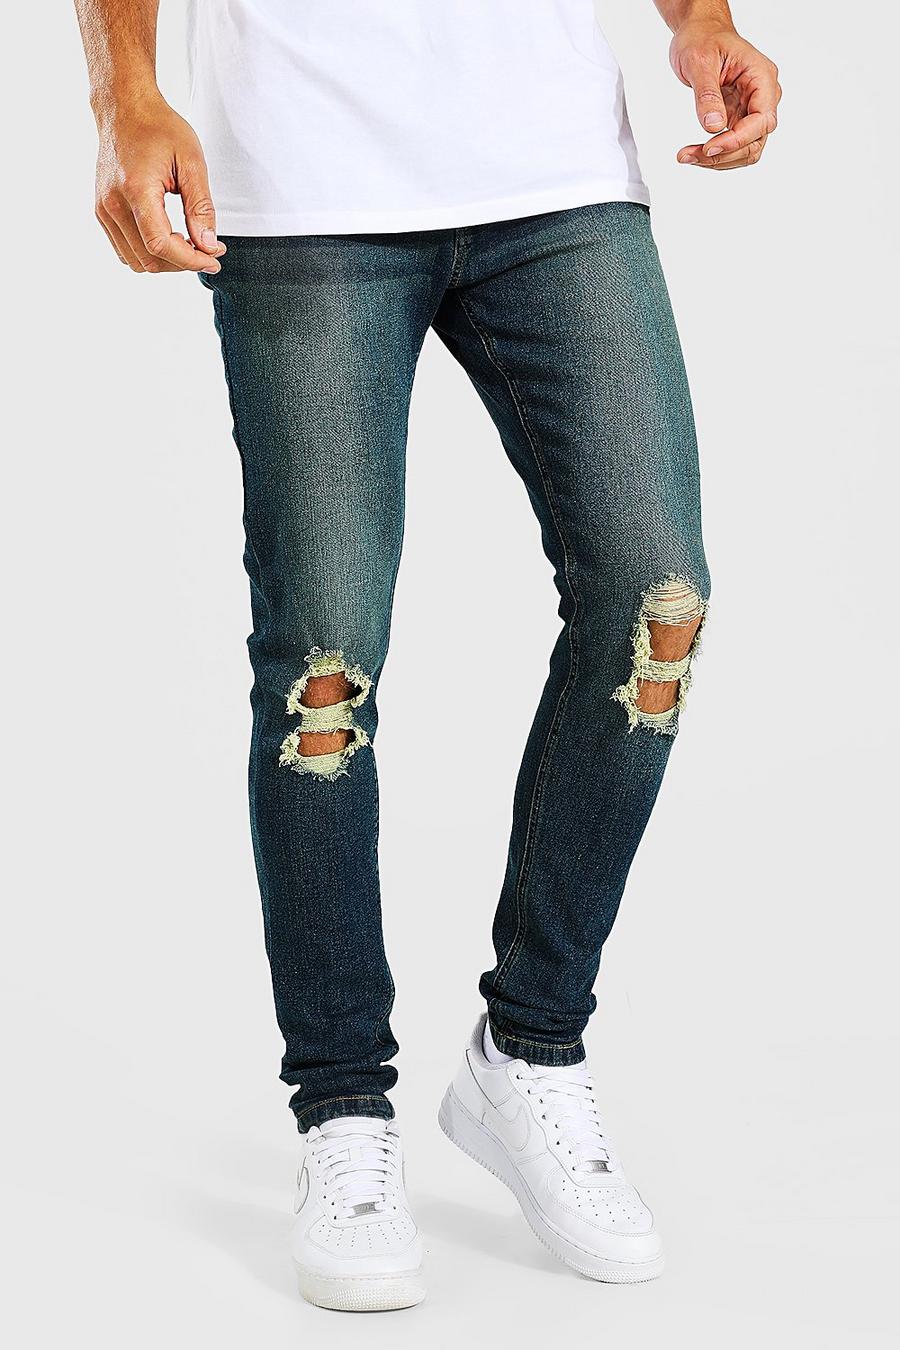 Jeans Tall Skinny Fit con doppio spacco sulle ginocchie, Antique blue image number 1